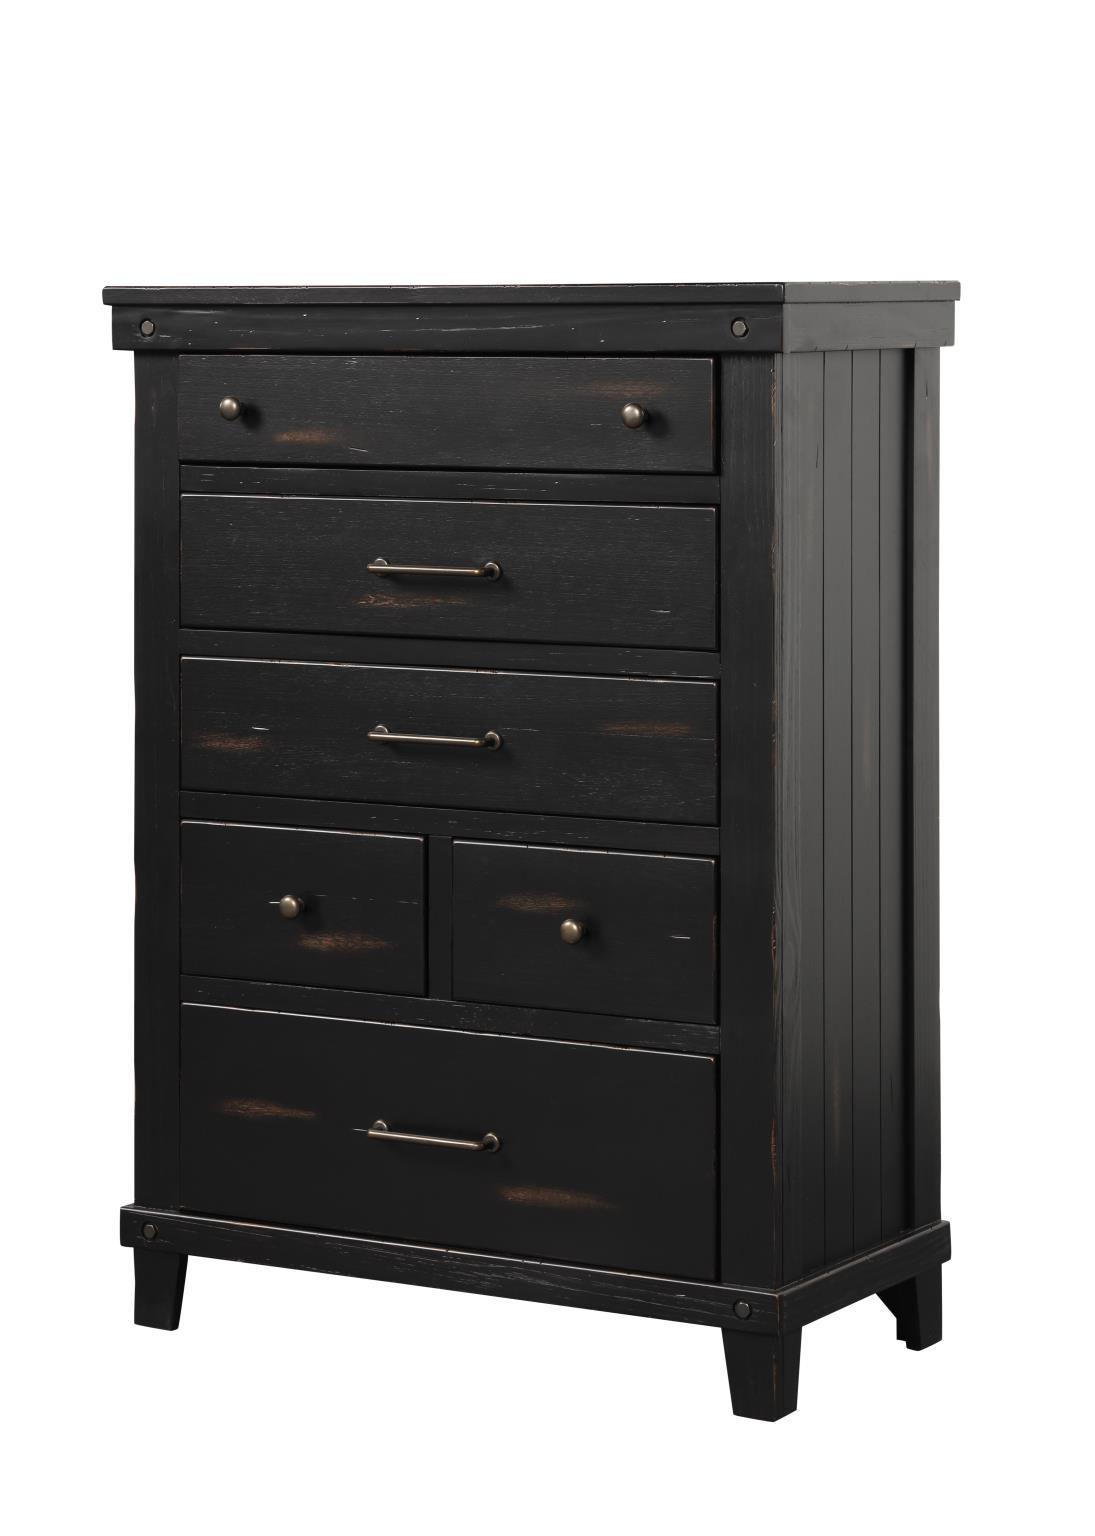 Classic, Transitional Chest SPRUCE CREEK 1708-150 1708-150 in Black 